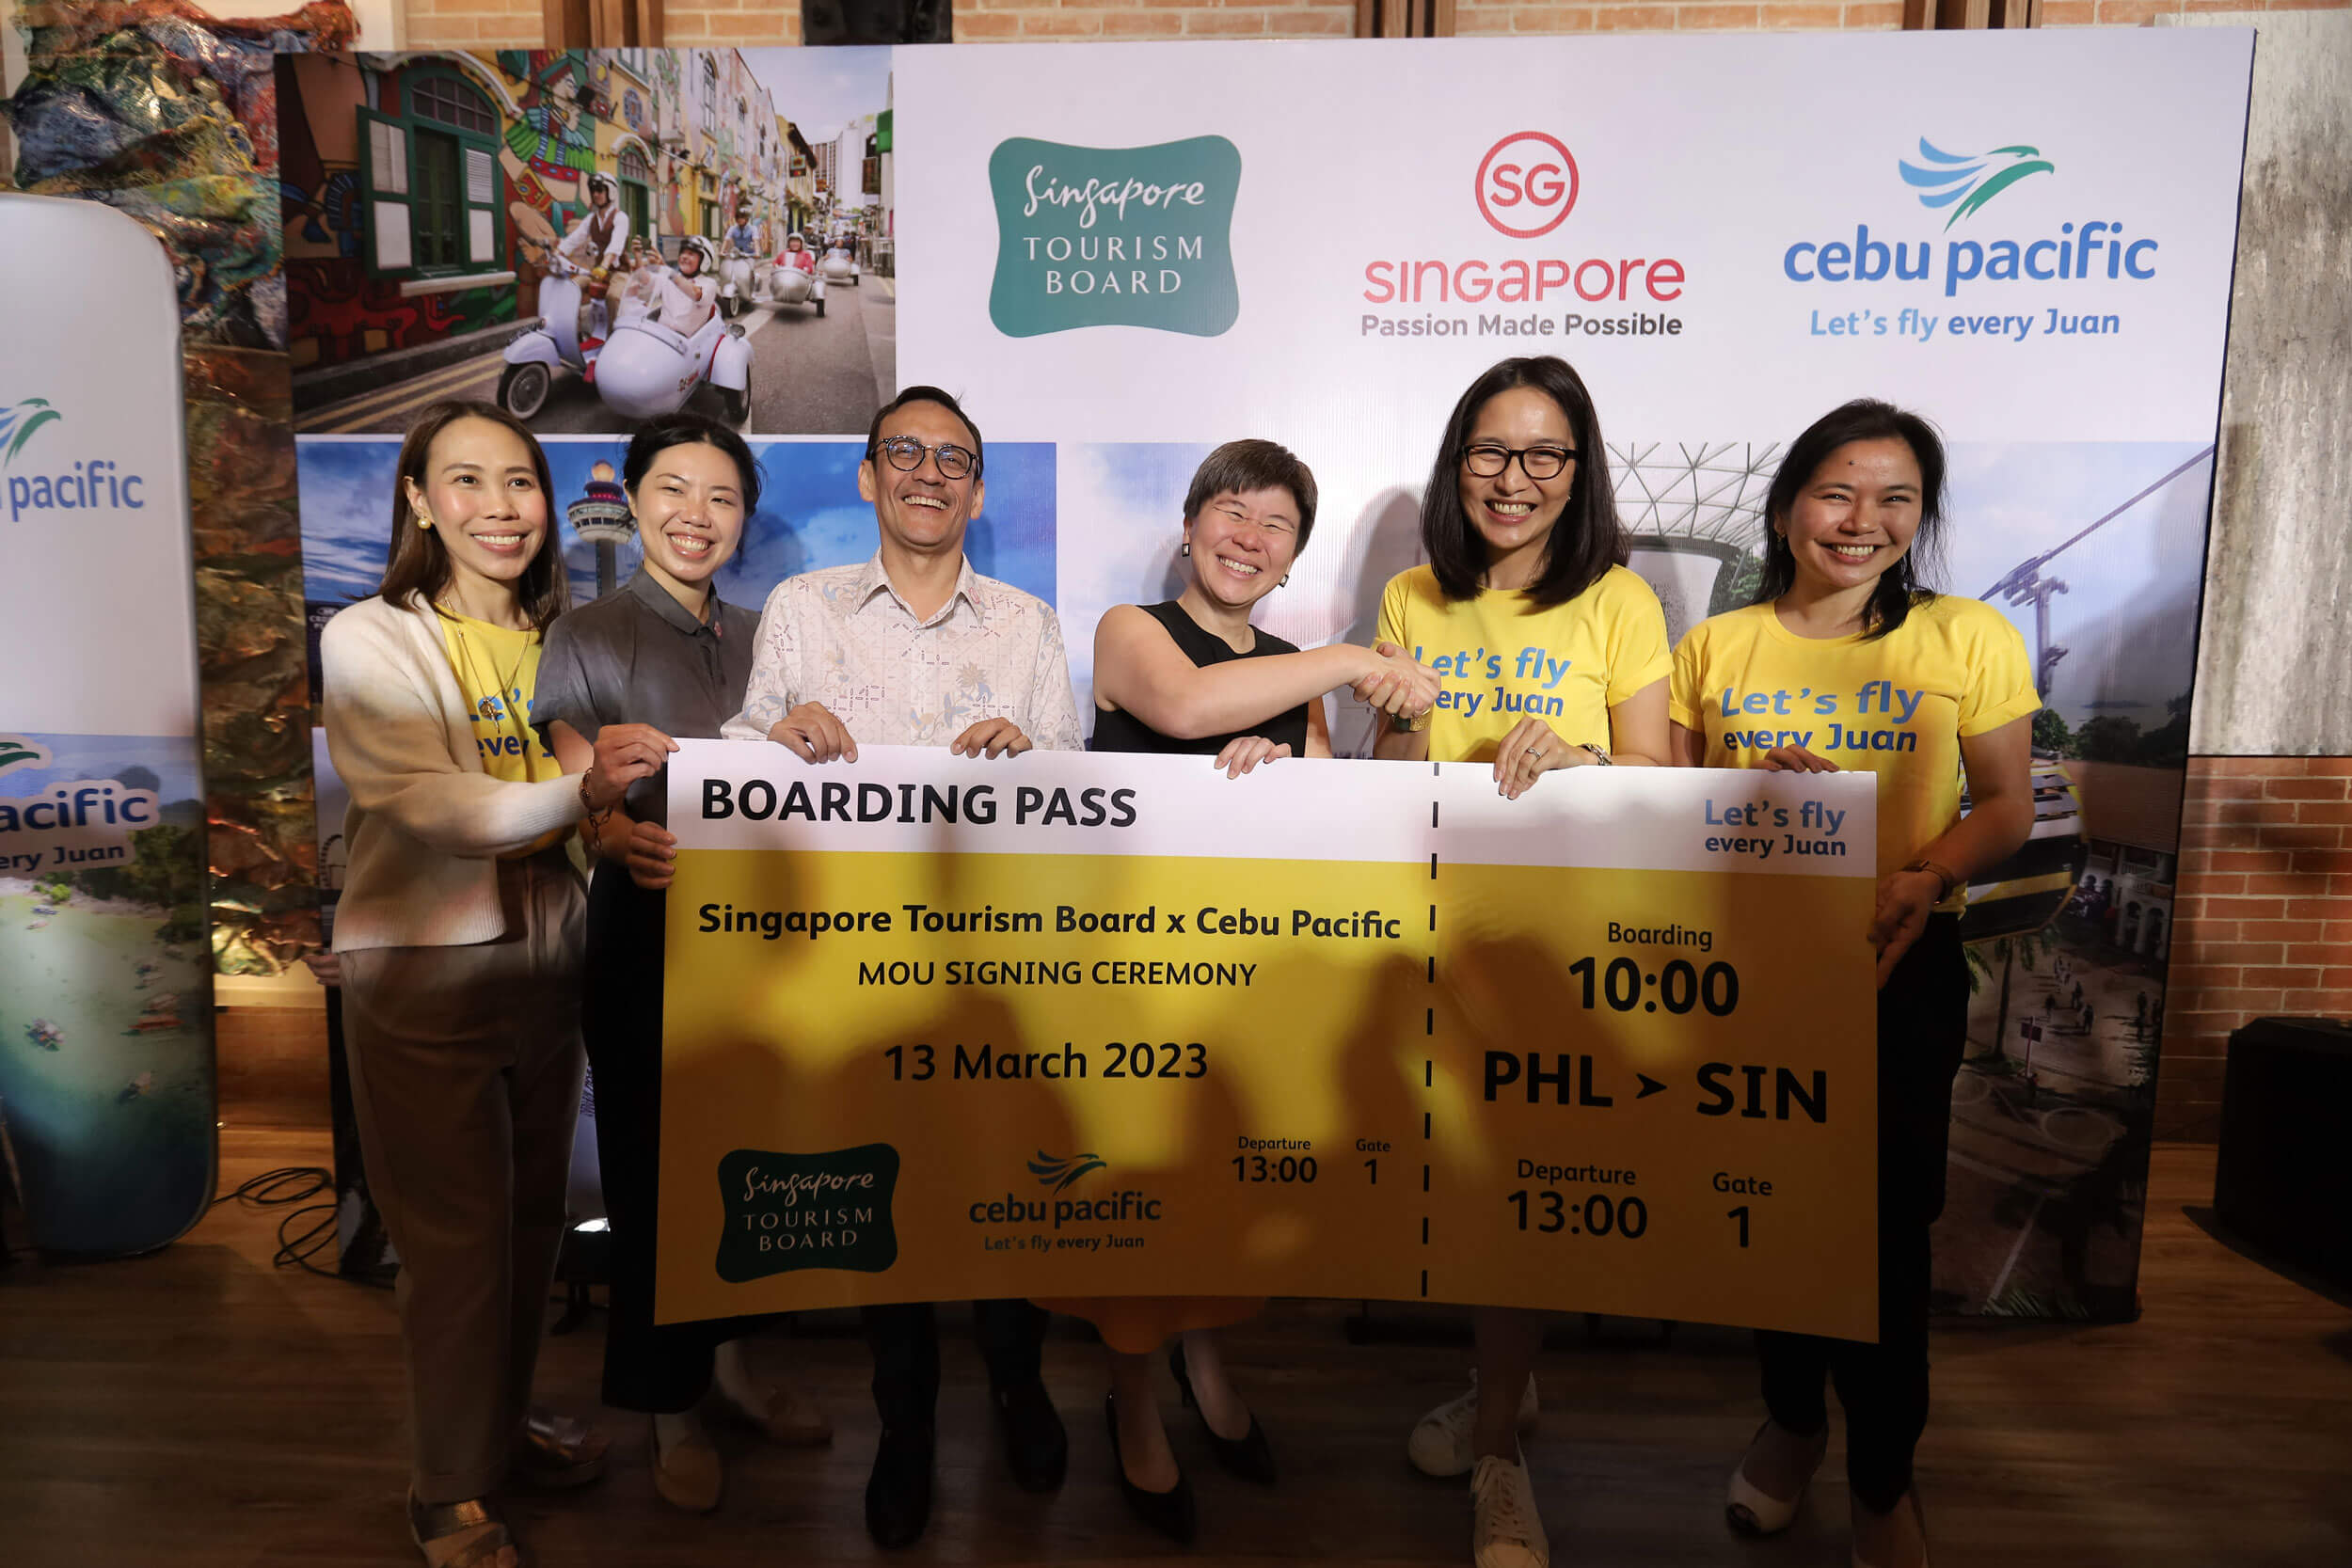 Cebu Pacific and Singapore Tourism Board executives pose for a photo following the MOU signing.